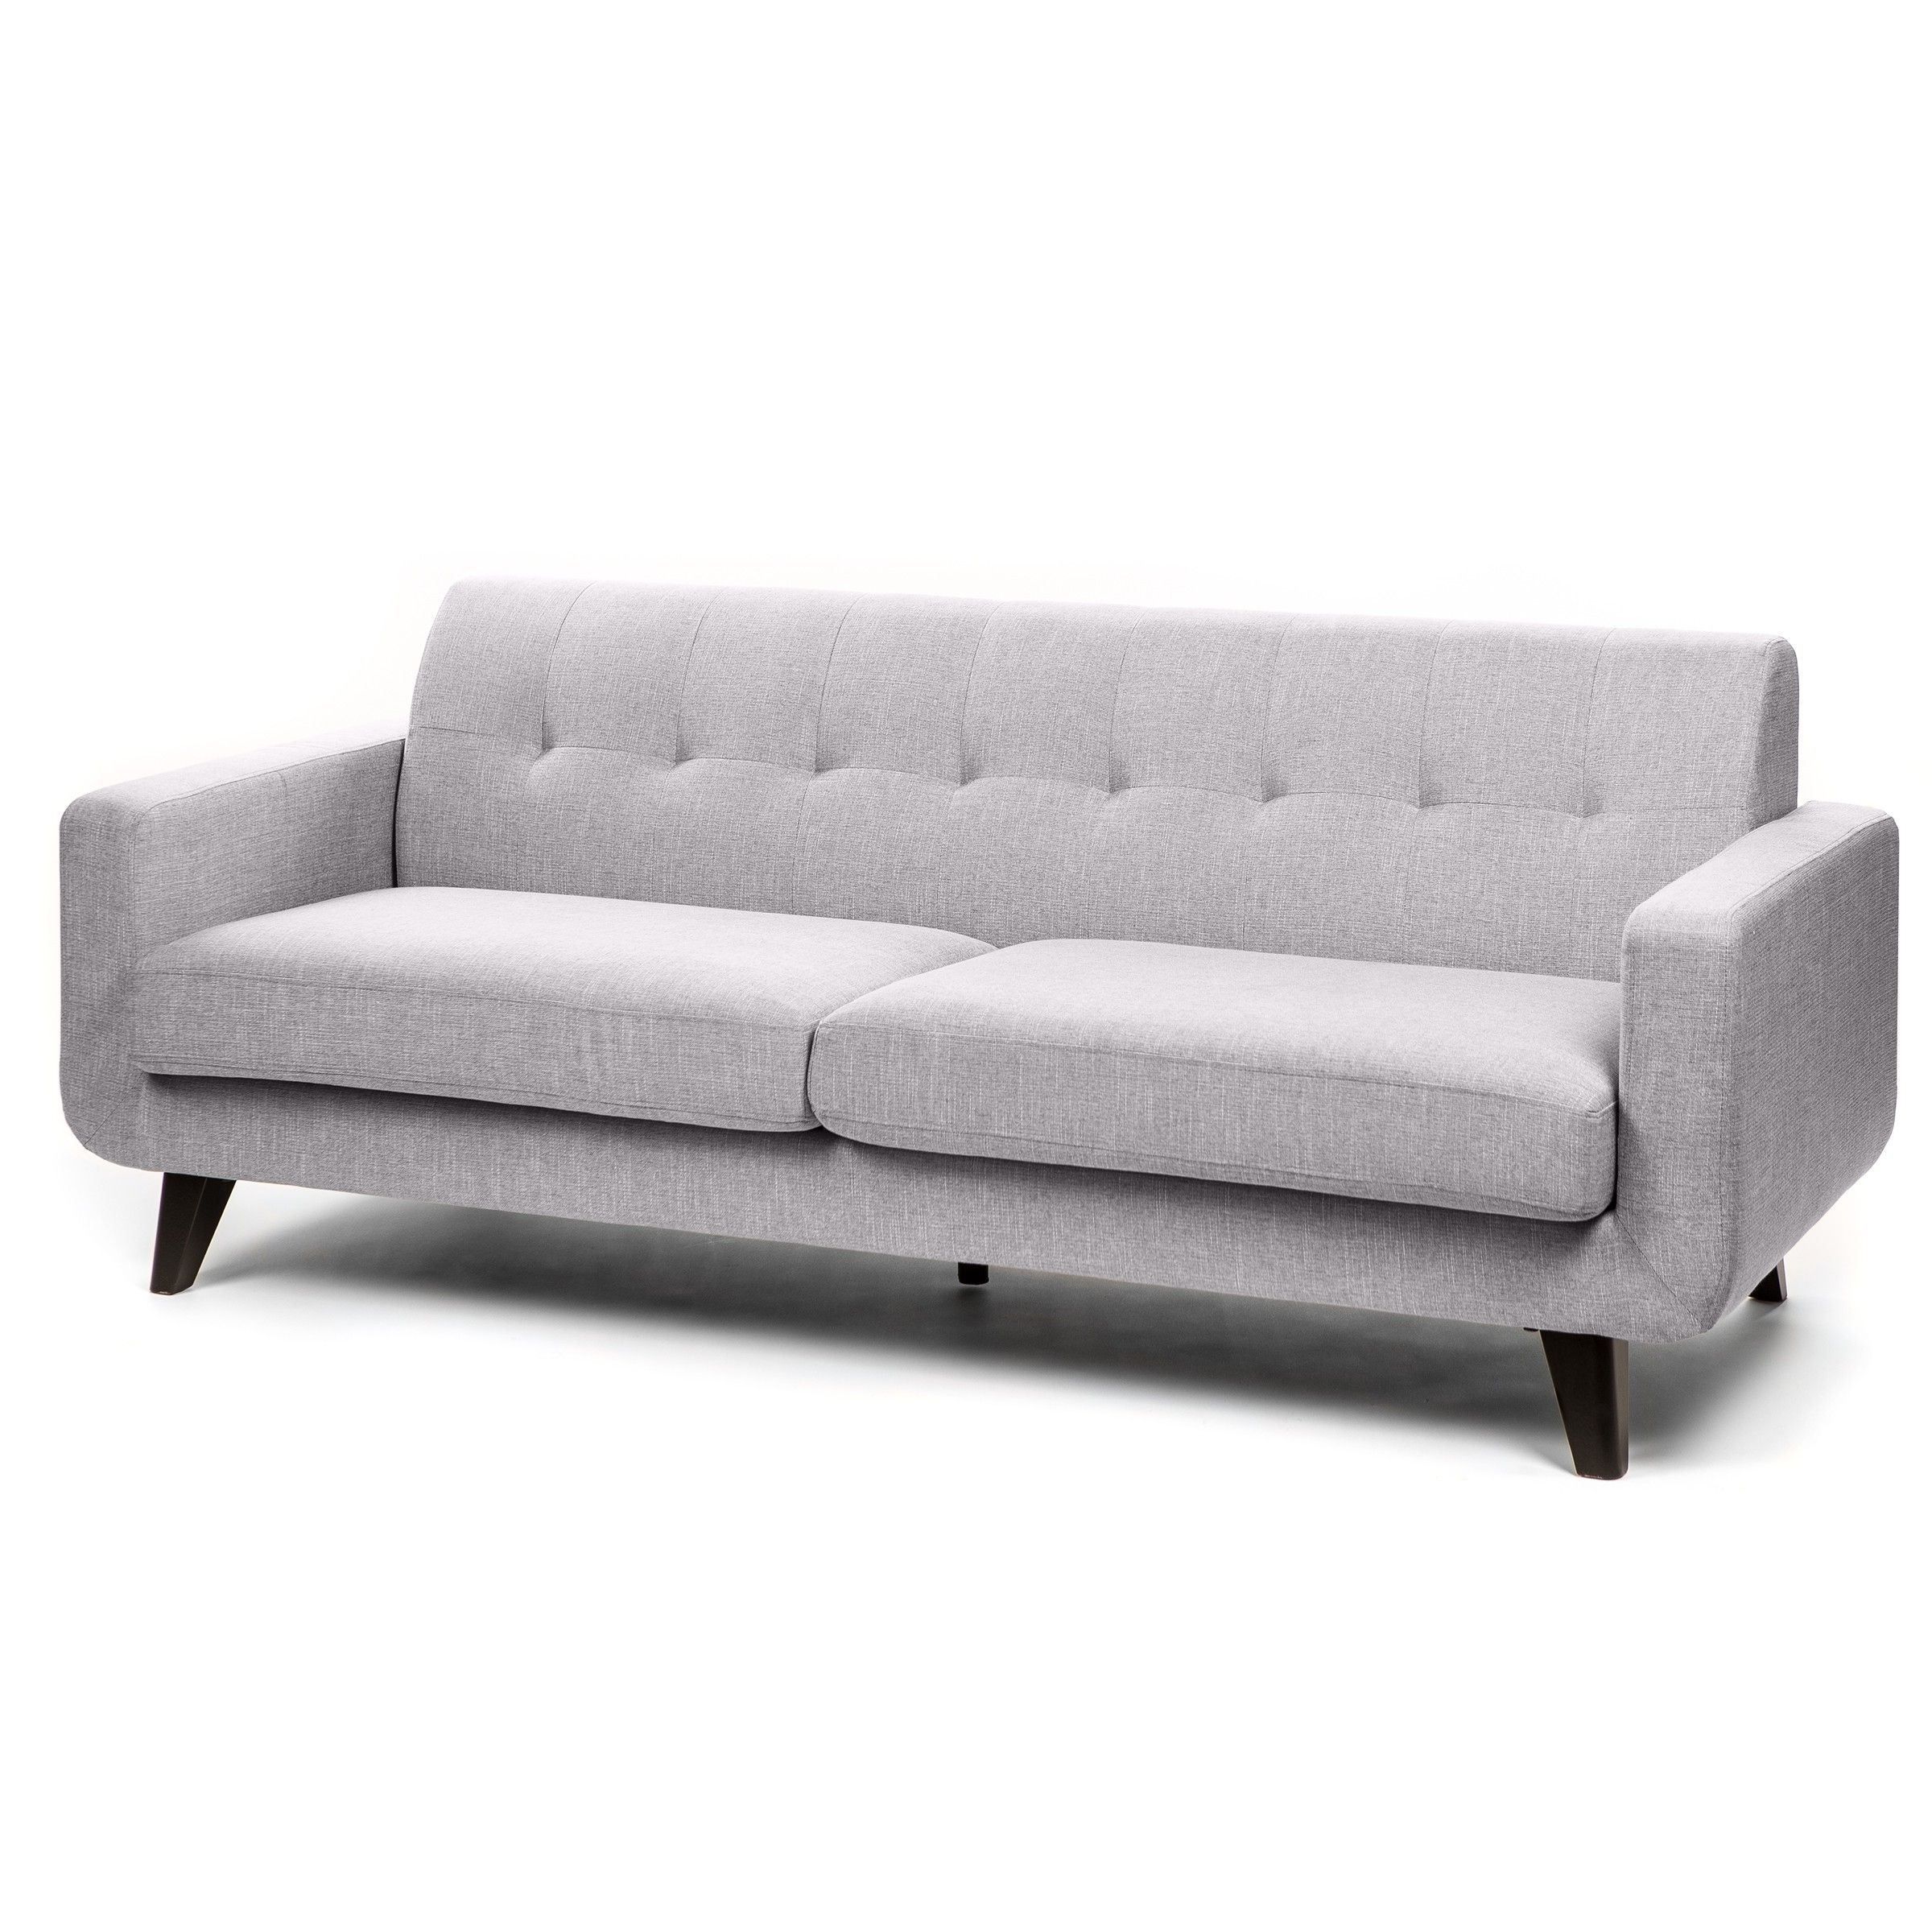 Fashionable Jysk Sectional Sofas Throughout Hansen Sofa Bed Jysk • Sofa Bed (View 14 of 15)